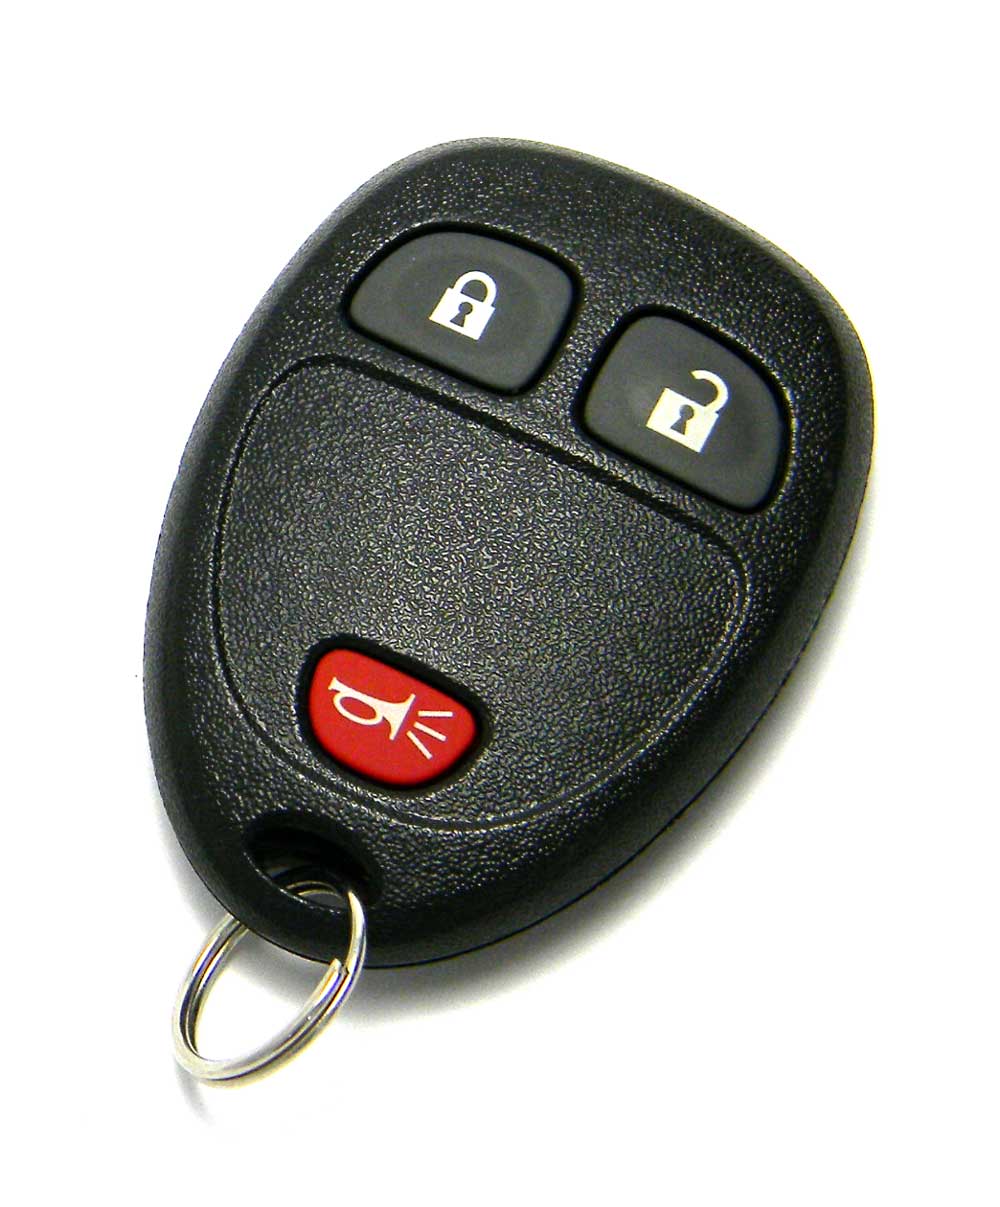 2007-2013 Chevrolet Silverado Key Fob Remote 3-Button (OUC60221 OR OUC60270) - Used